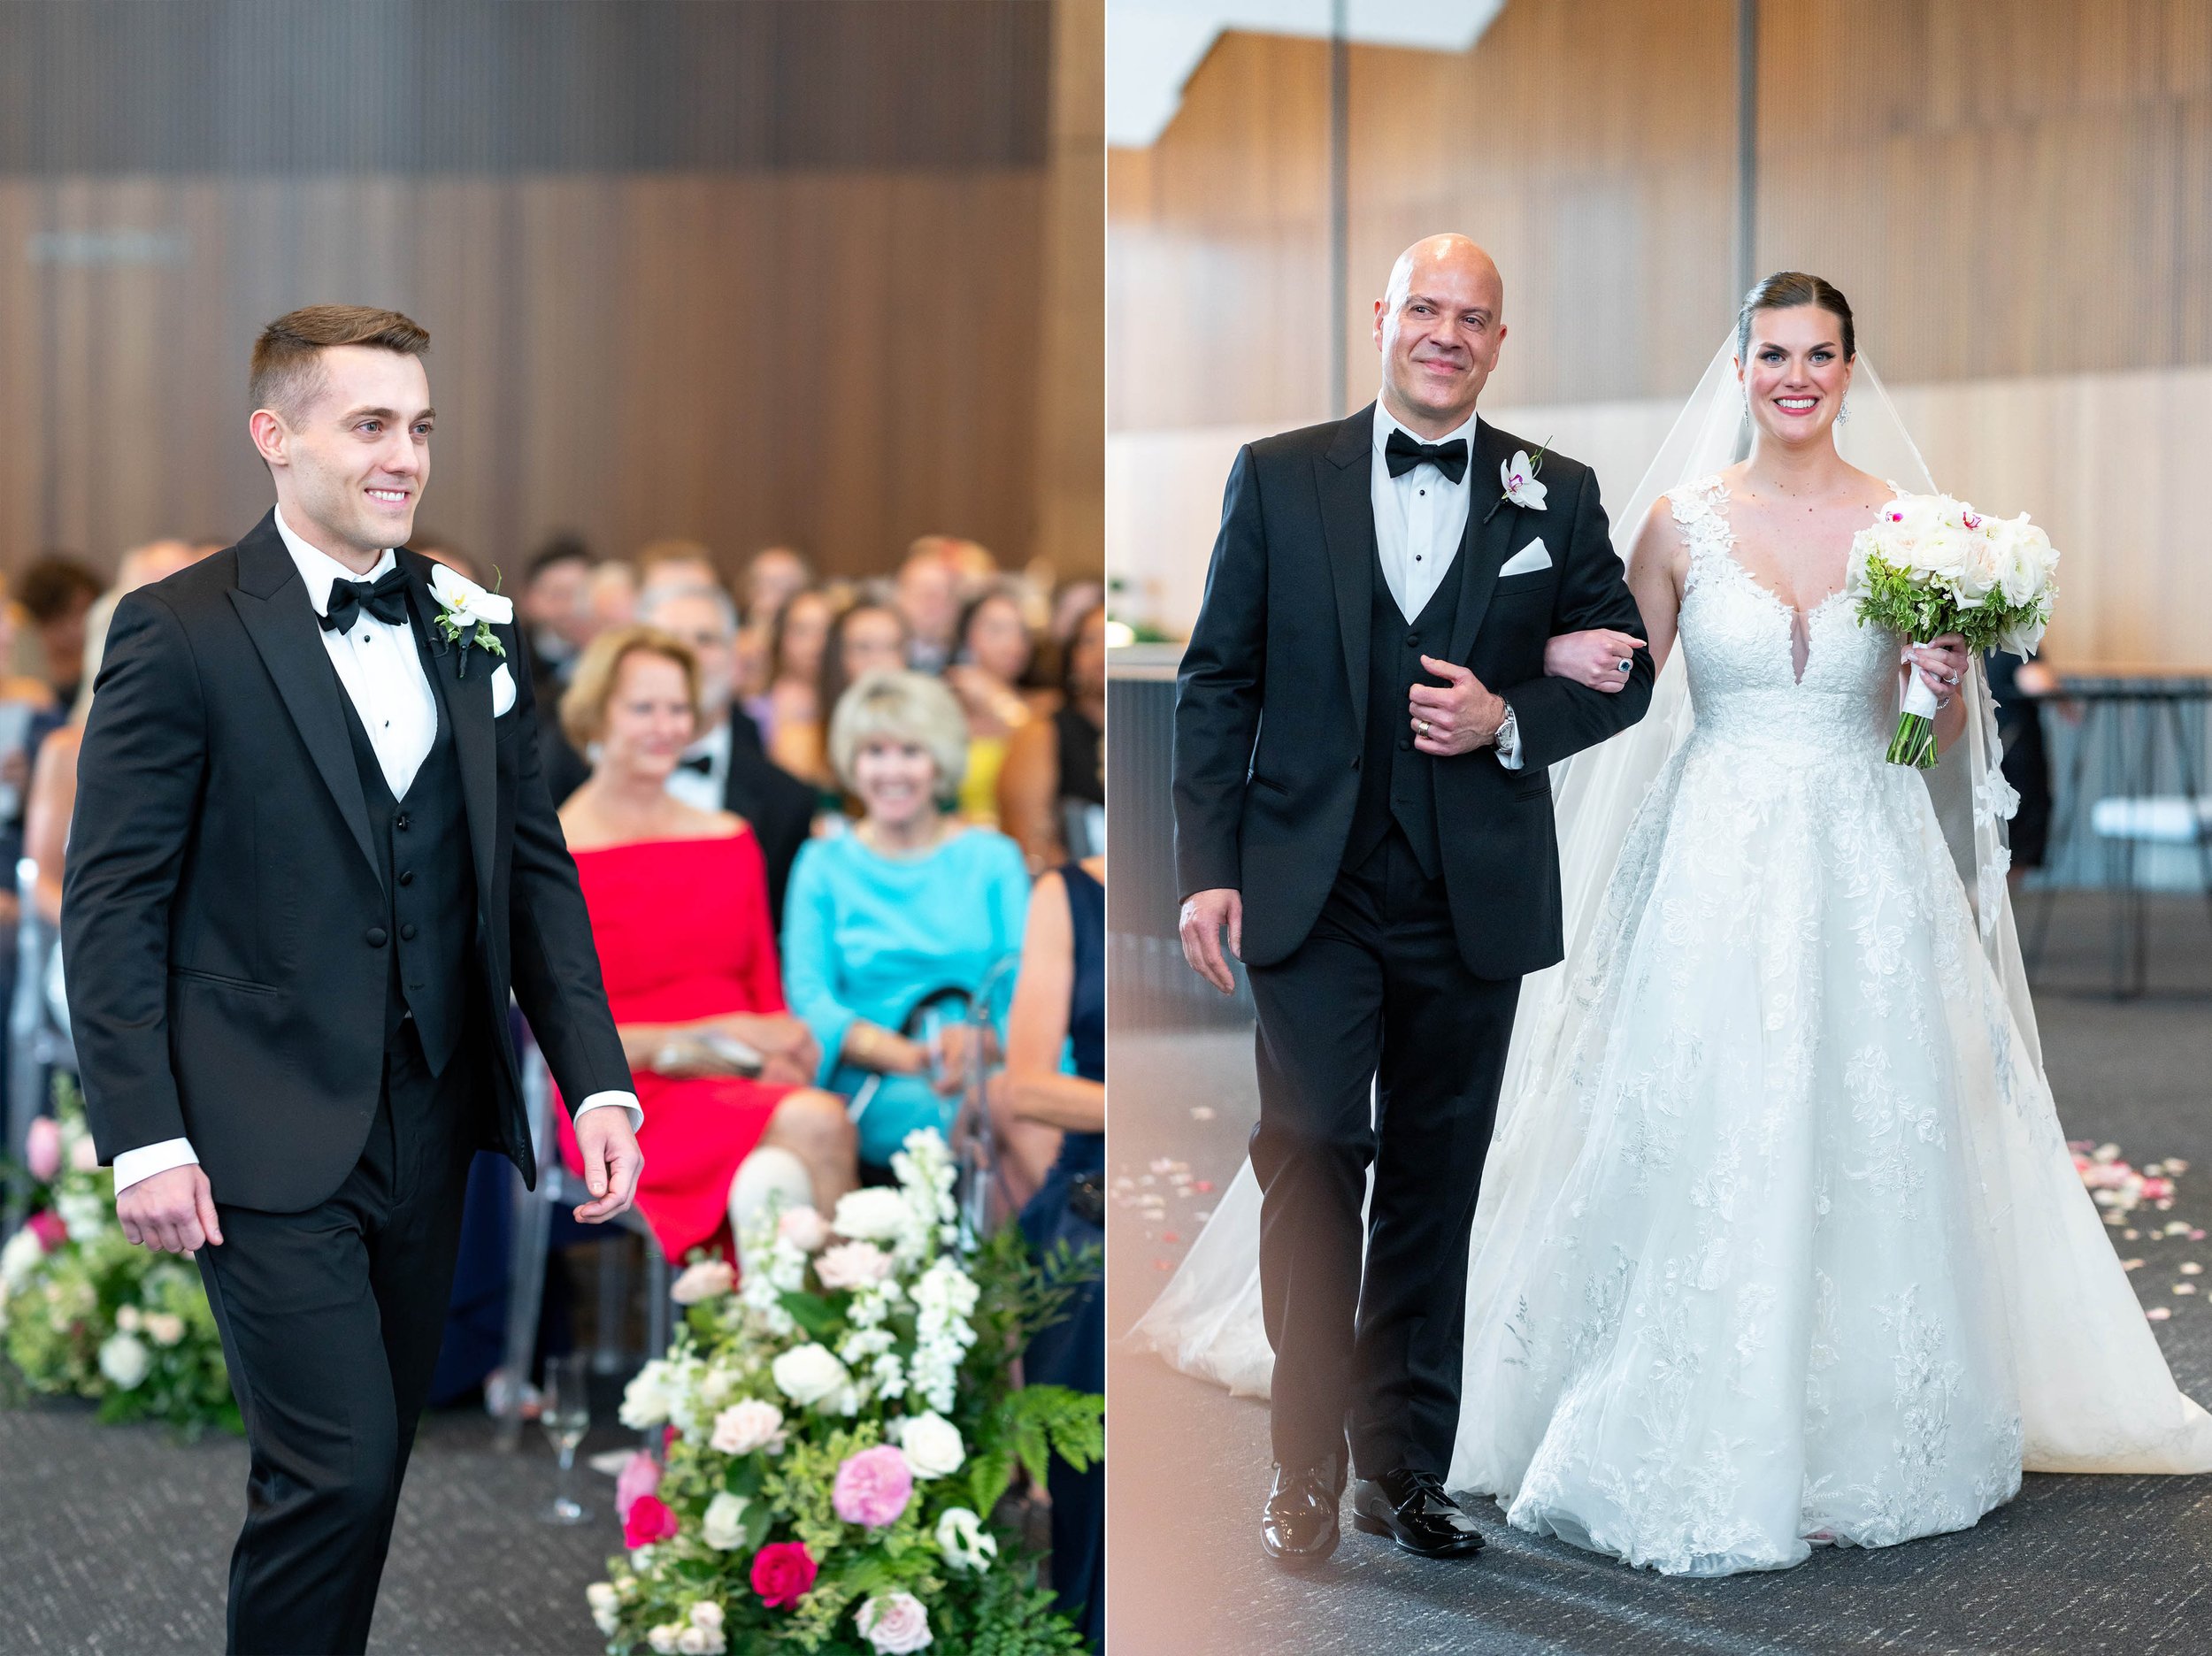 Bride and groom walking down the ceremony aisle at Capital One Hall